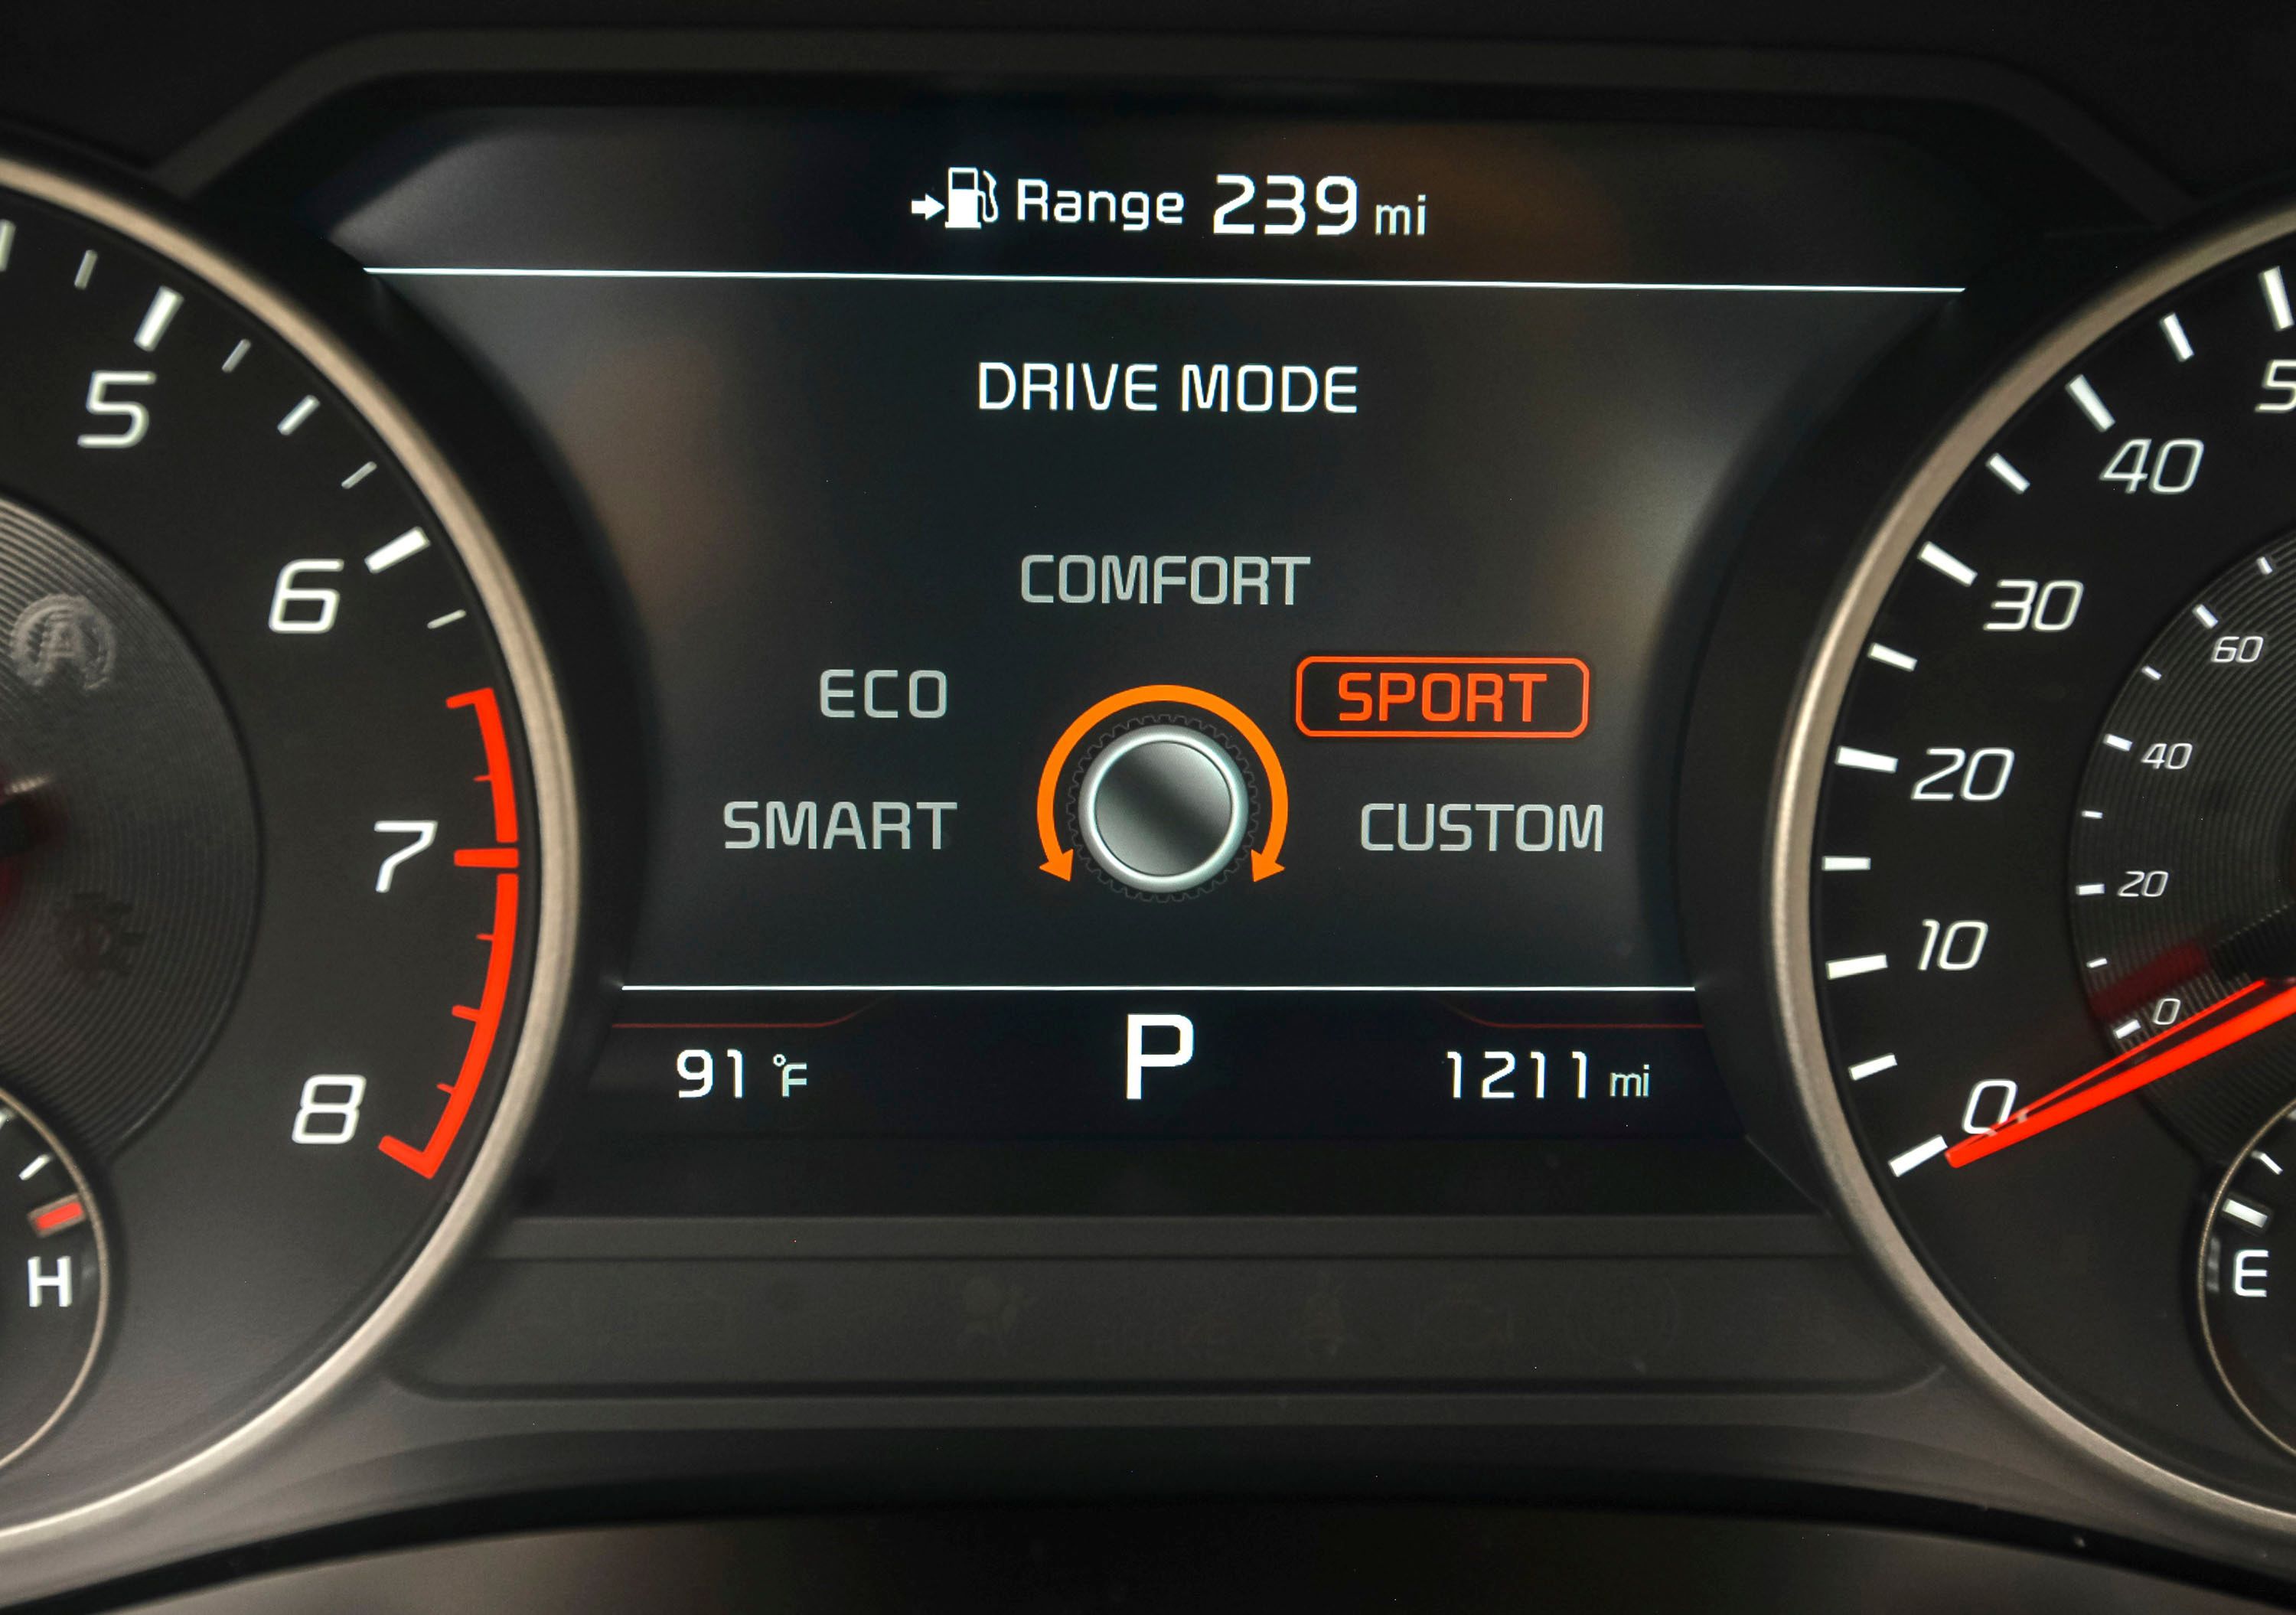 Instrument cluster includes oil temp, navigation, g-forces, and a lap timer